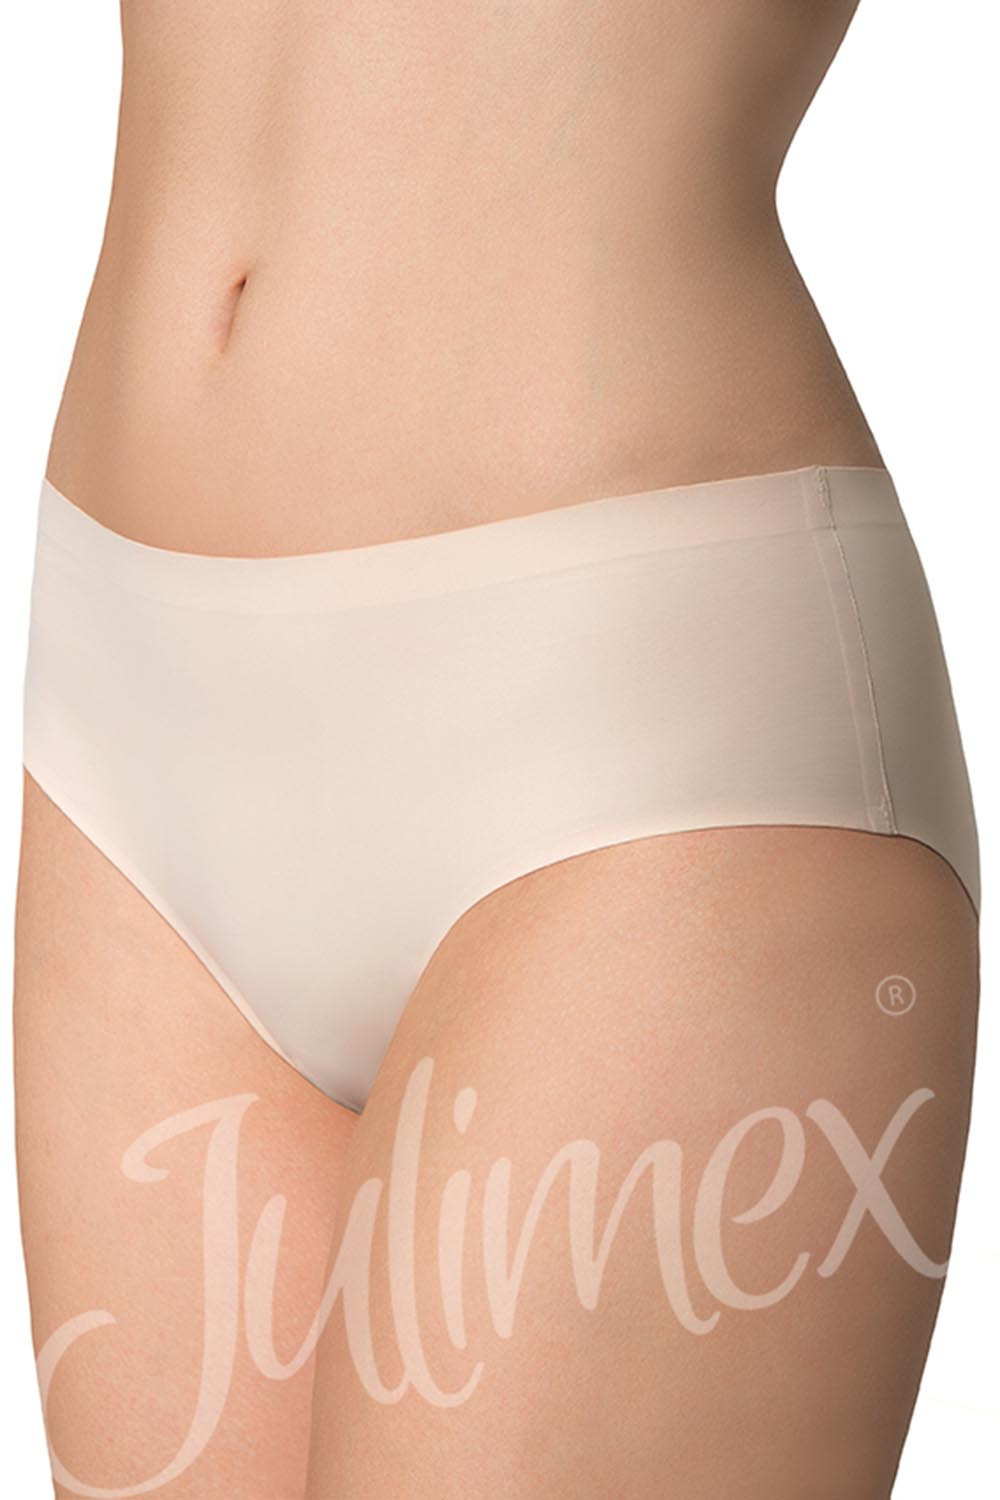 Julimex Simple panty kolor:beżowy XL